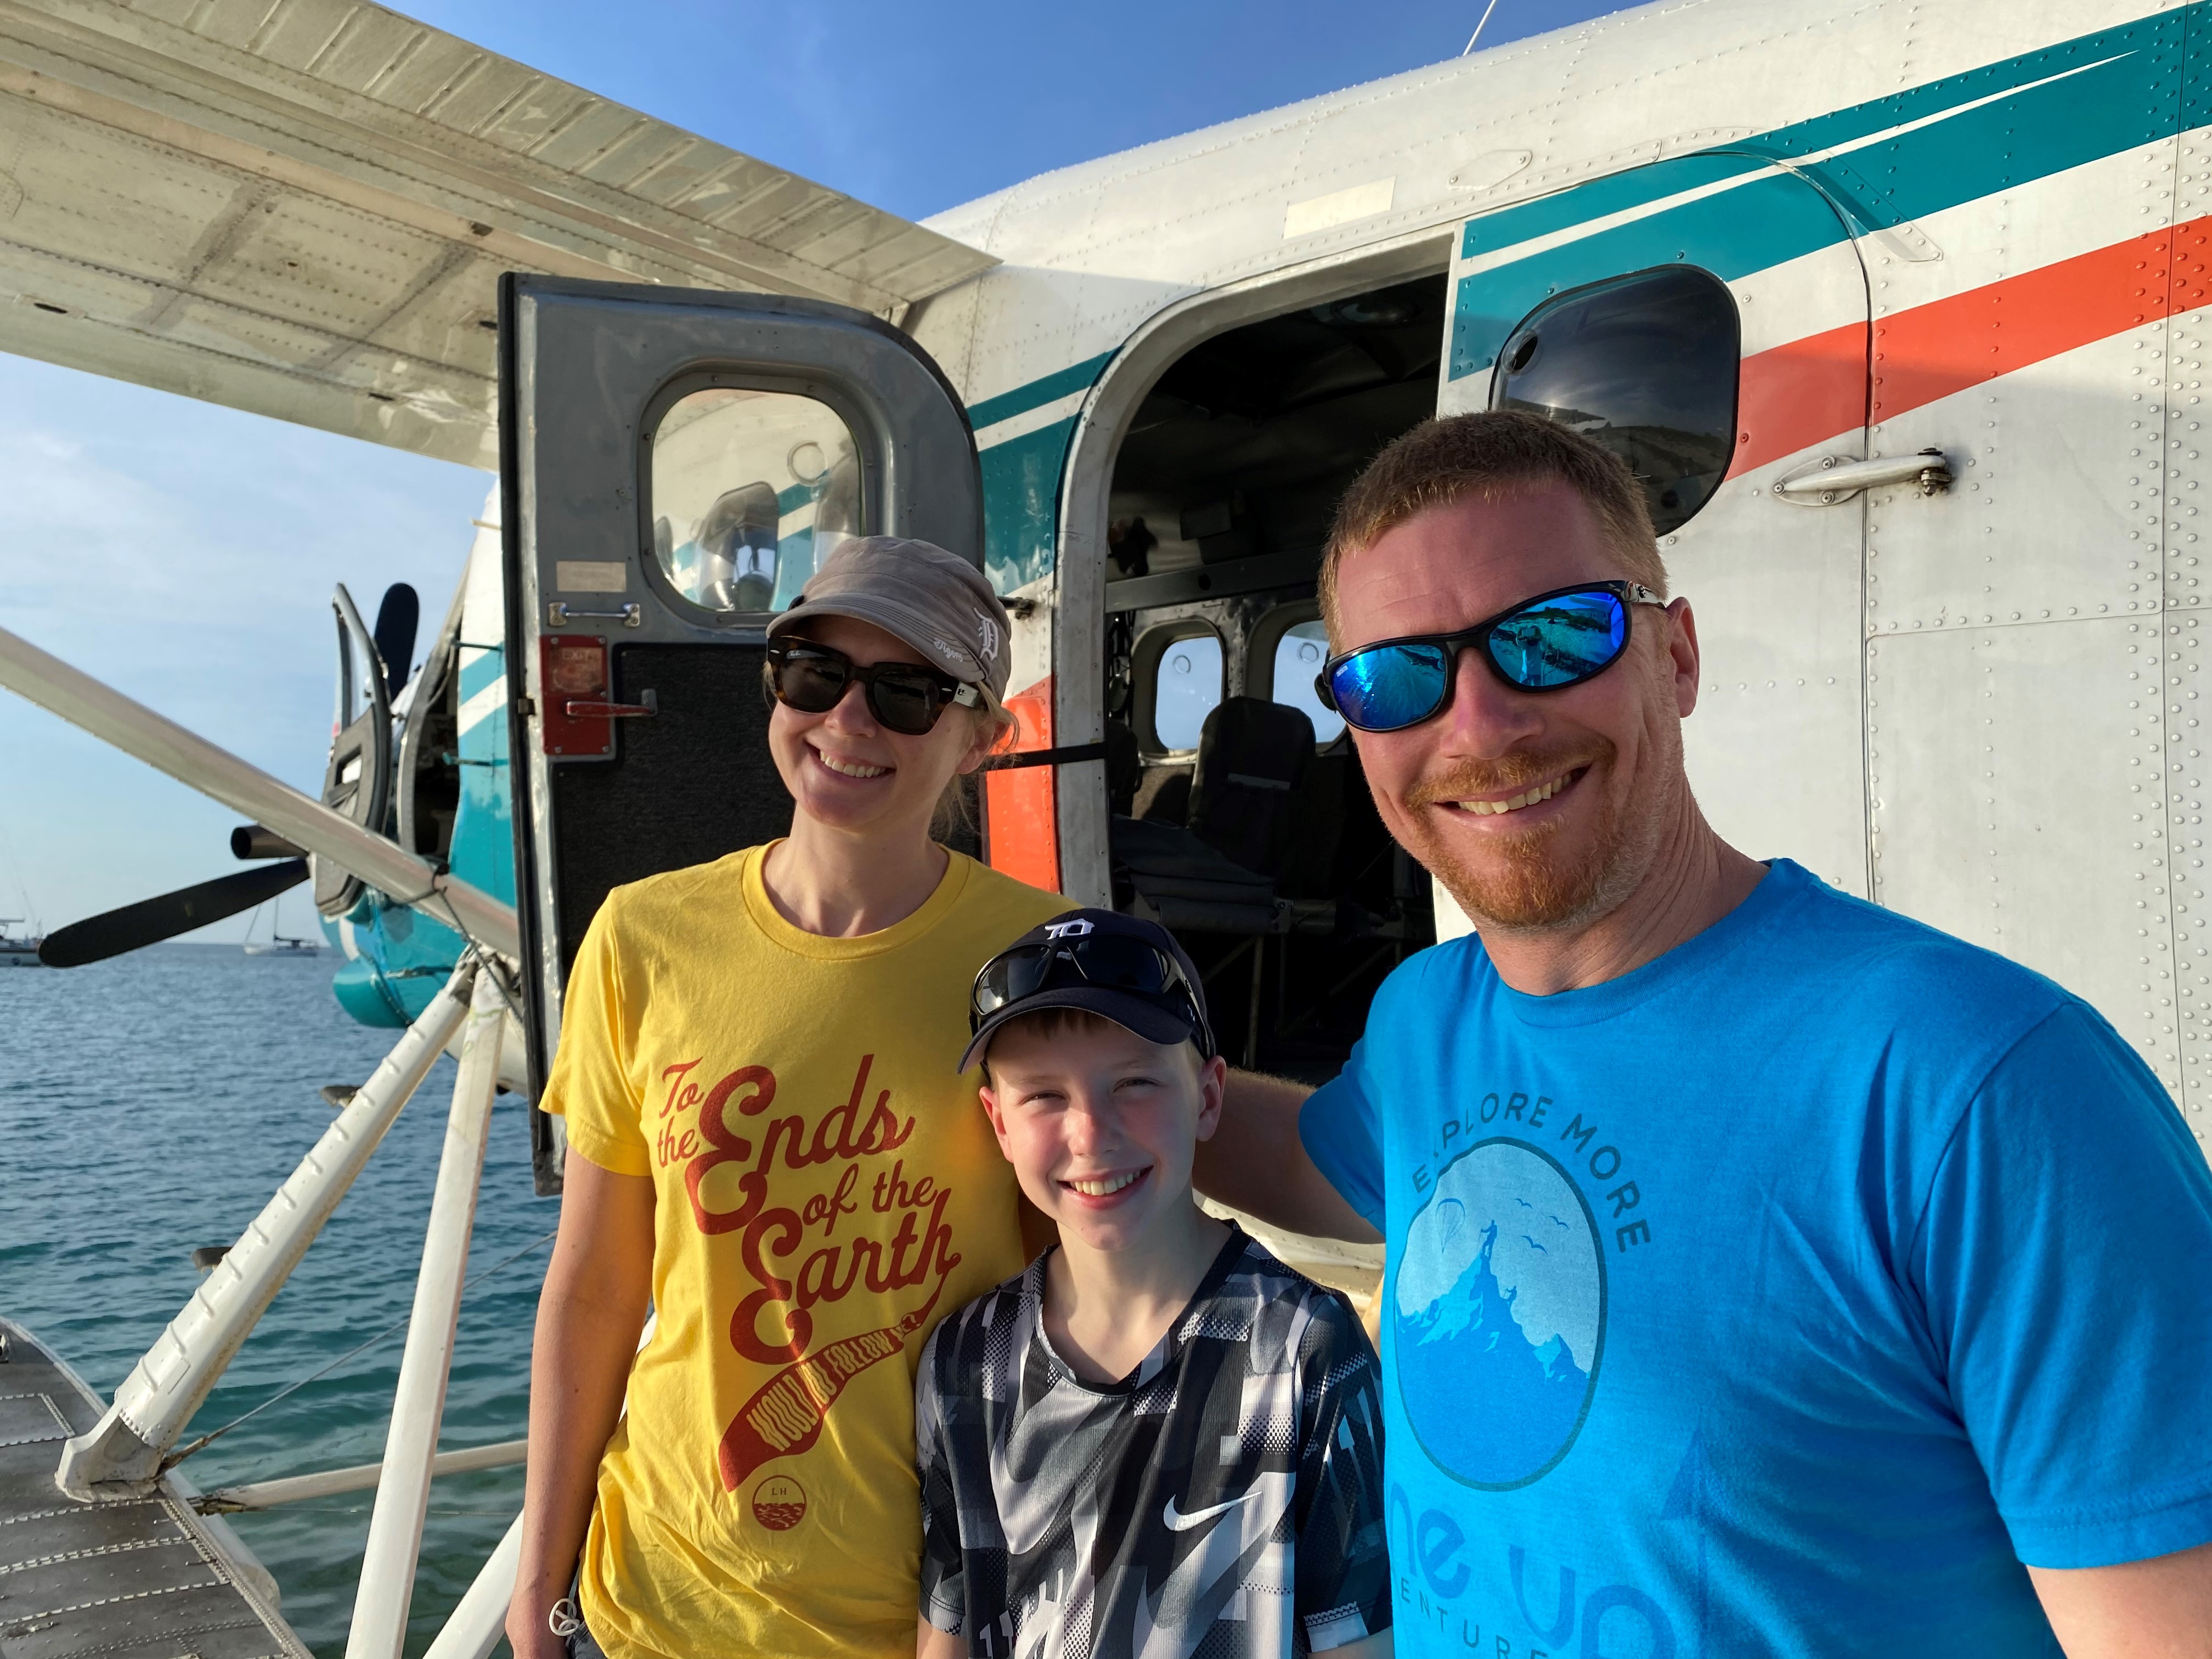 Holmquist's family on vacation visiting Dry Tortugas National Park via seaplane, an experience she highly recommends.